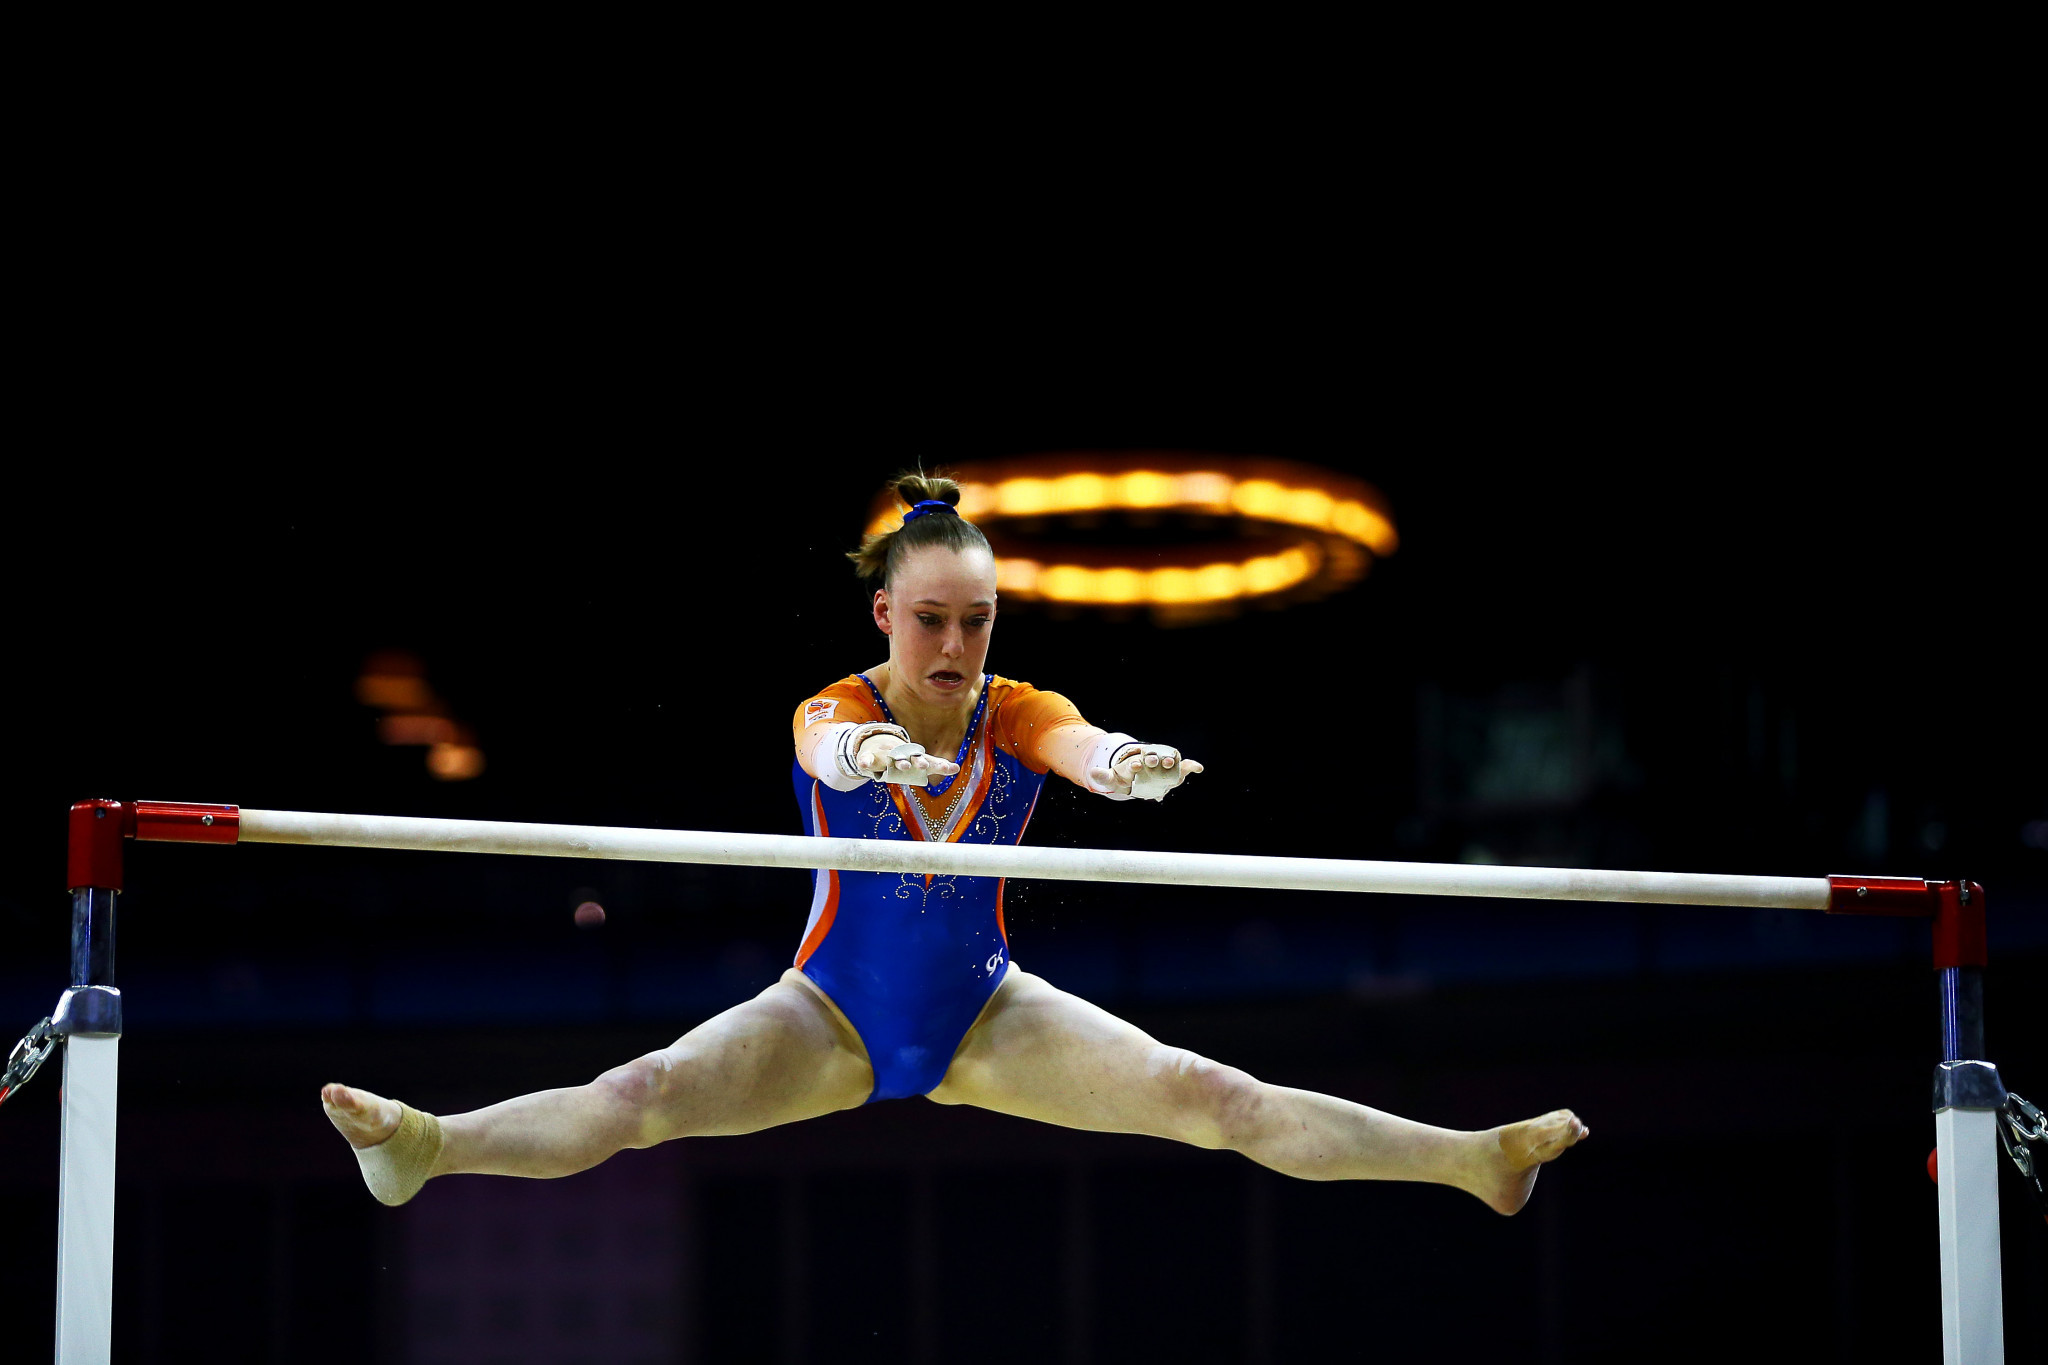 Tisha Volleman led a one-two for The Netherlands in the women's uneven bars in Cottbus ©Getty Images